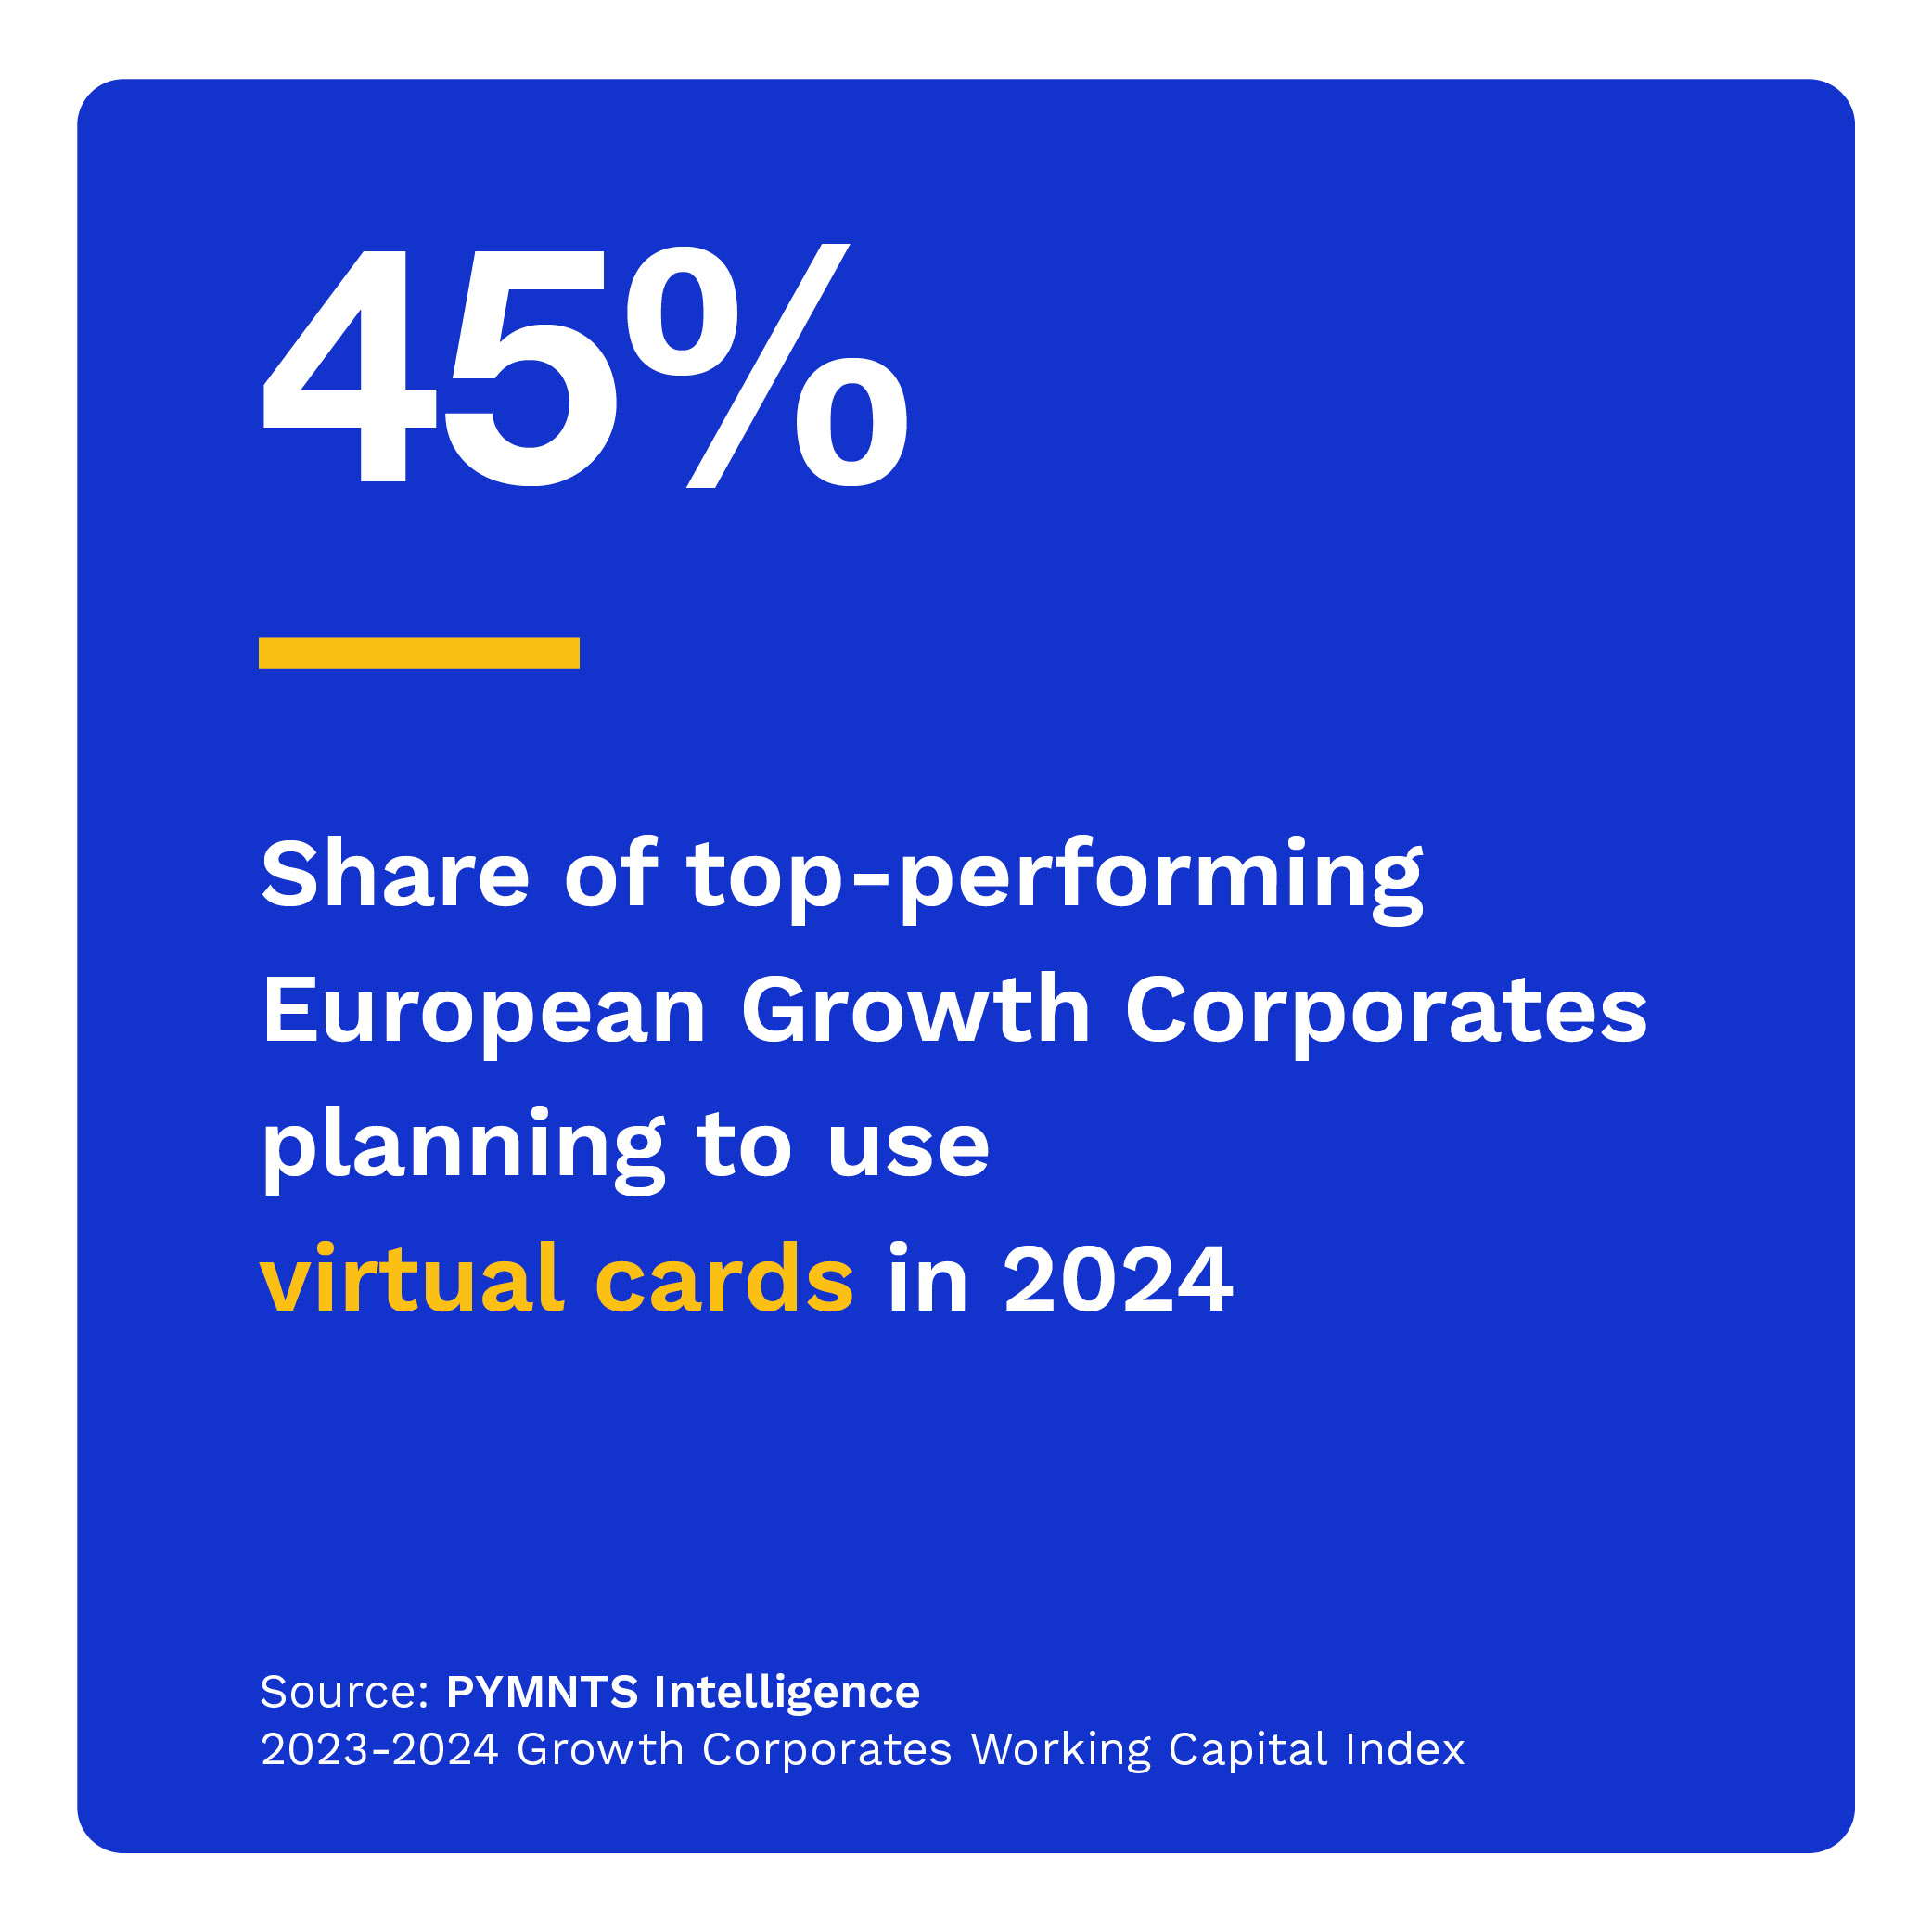 45%: Share of top-performing European Growth Corporates planning to use virtual cards in 2024